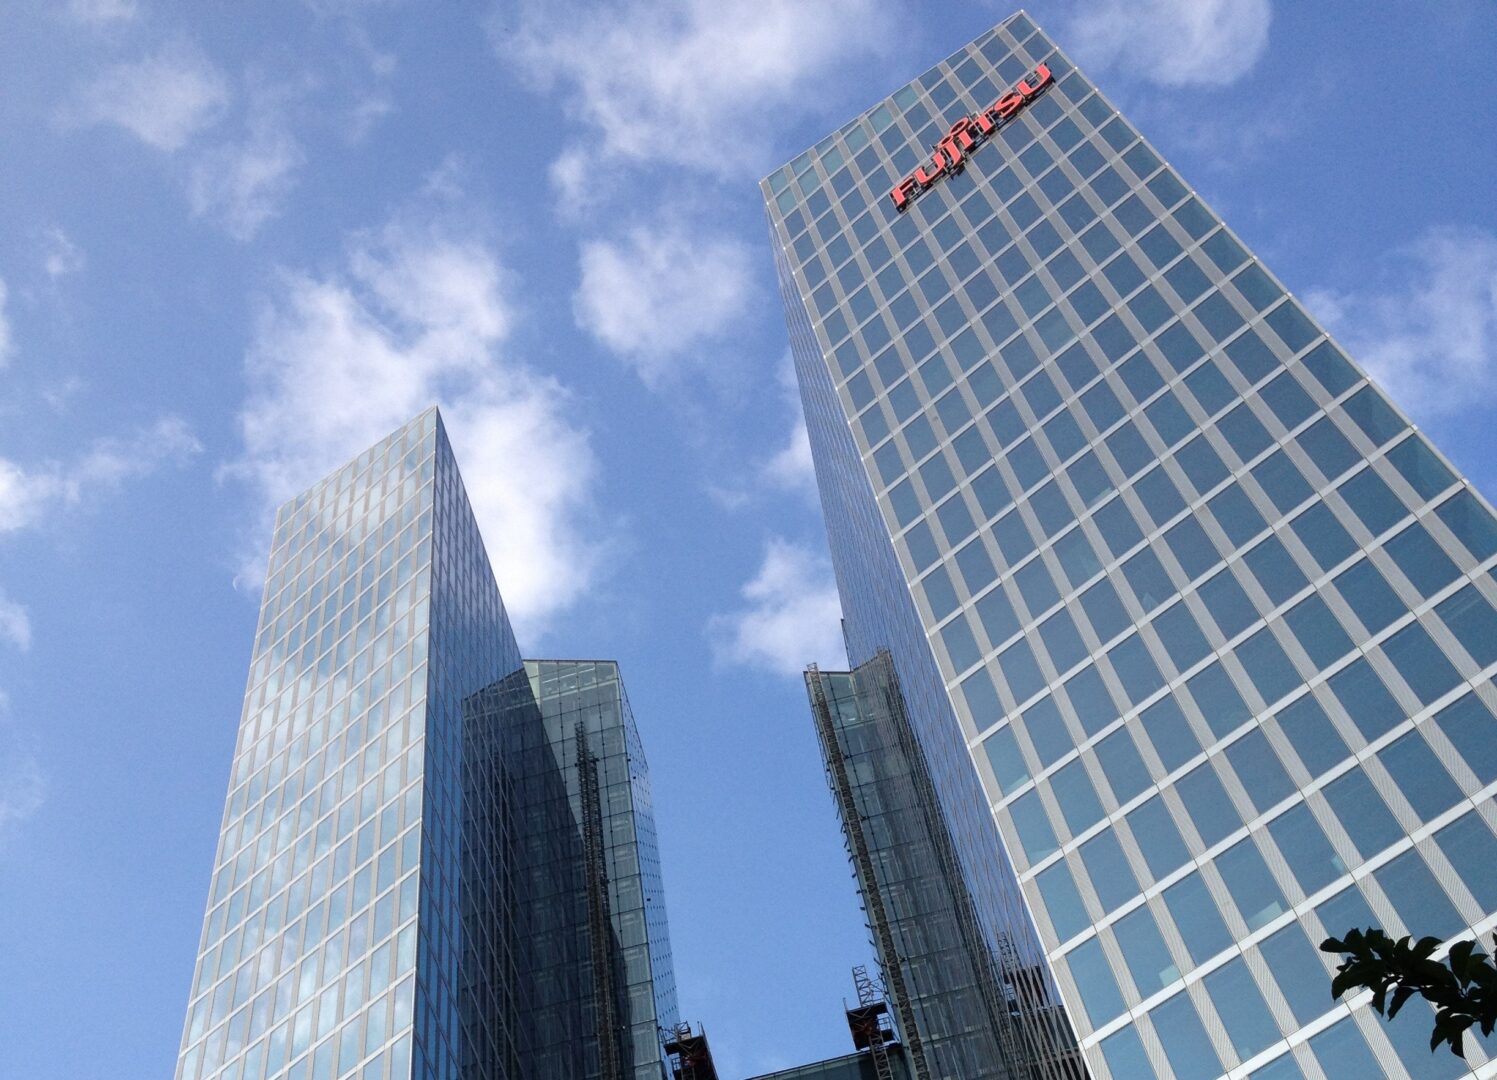 A photo taken from below, Fujitsu's skyscrapers. Behind them is a bright blue sky.